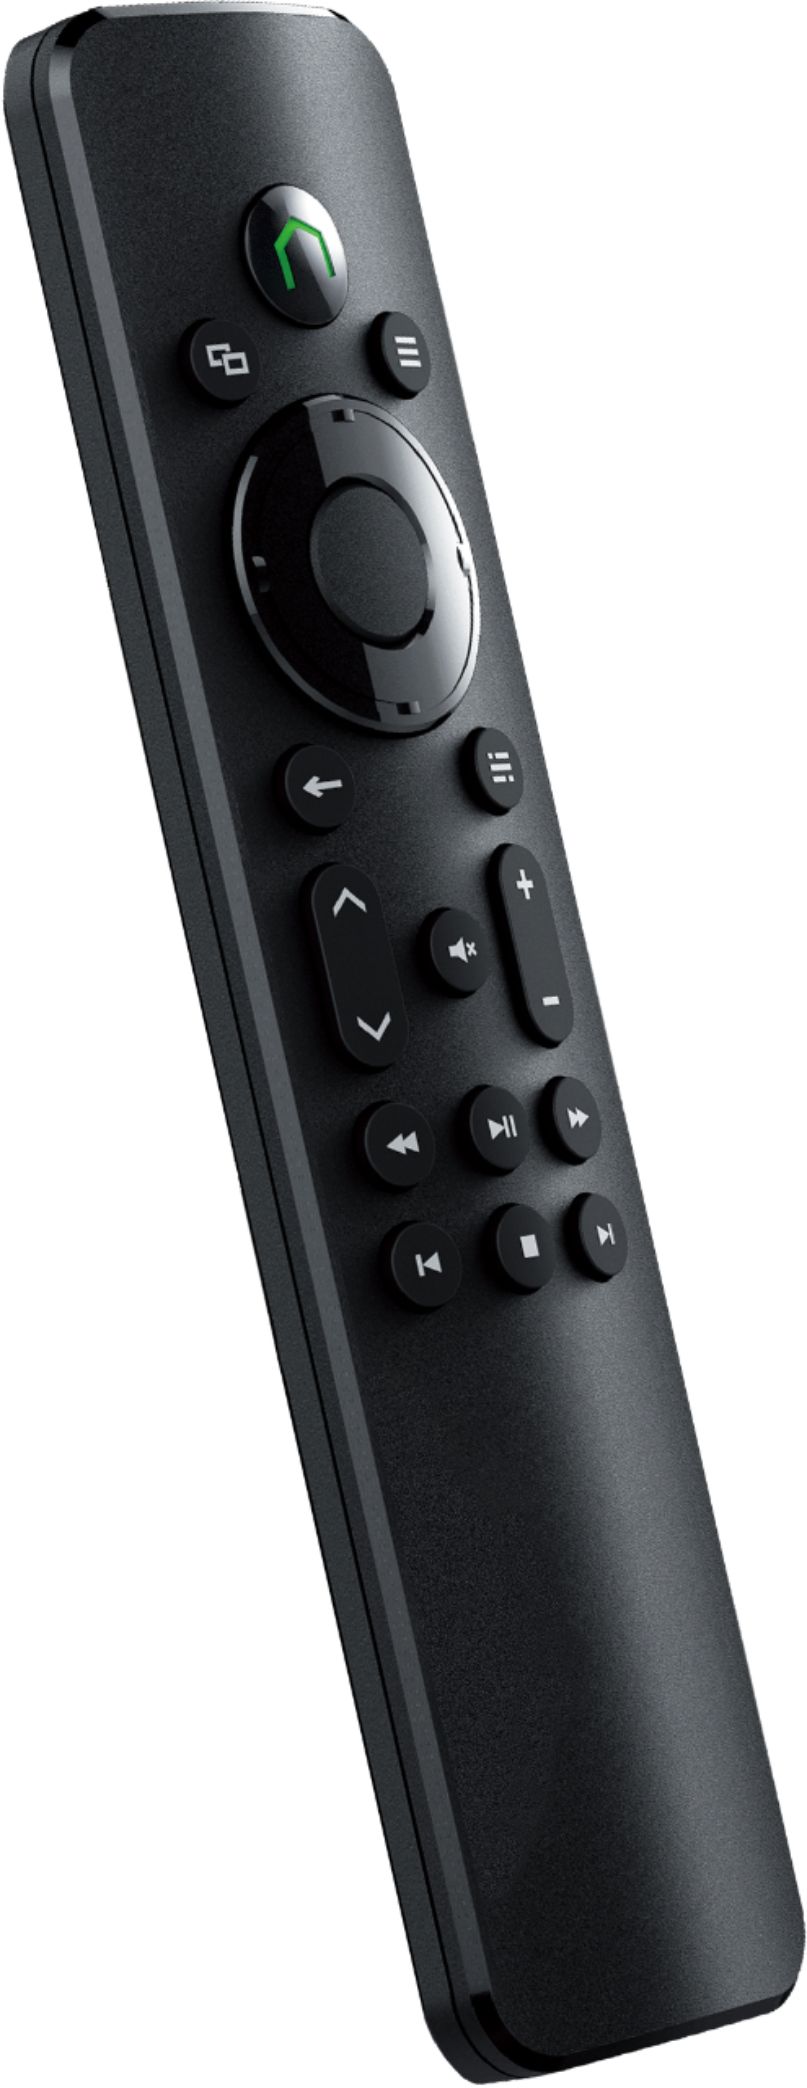 Insignia Media Remote for Xbox Series X|S, One (Black) $9 + Free Shipping